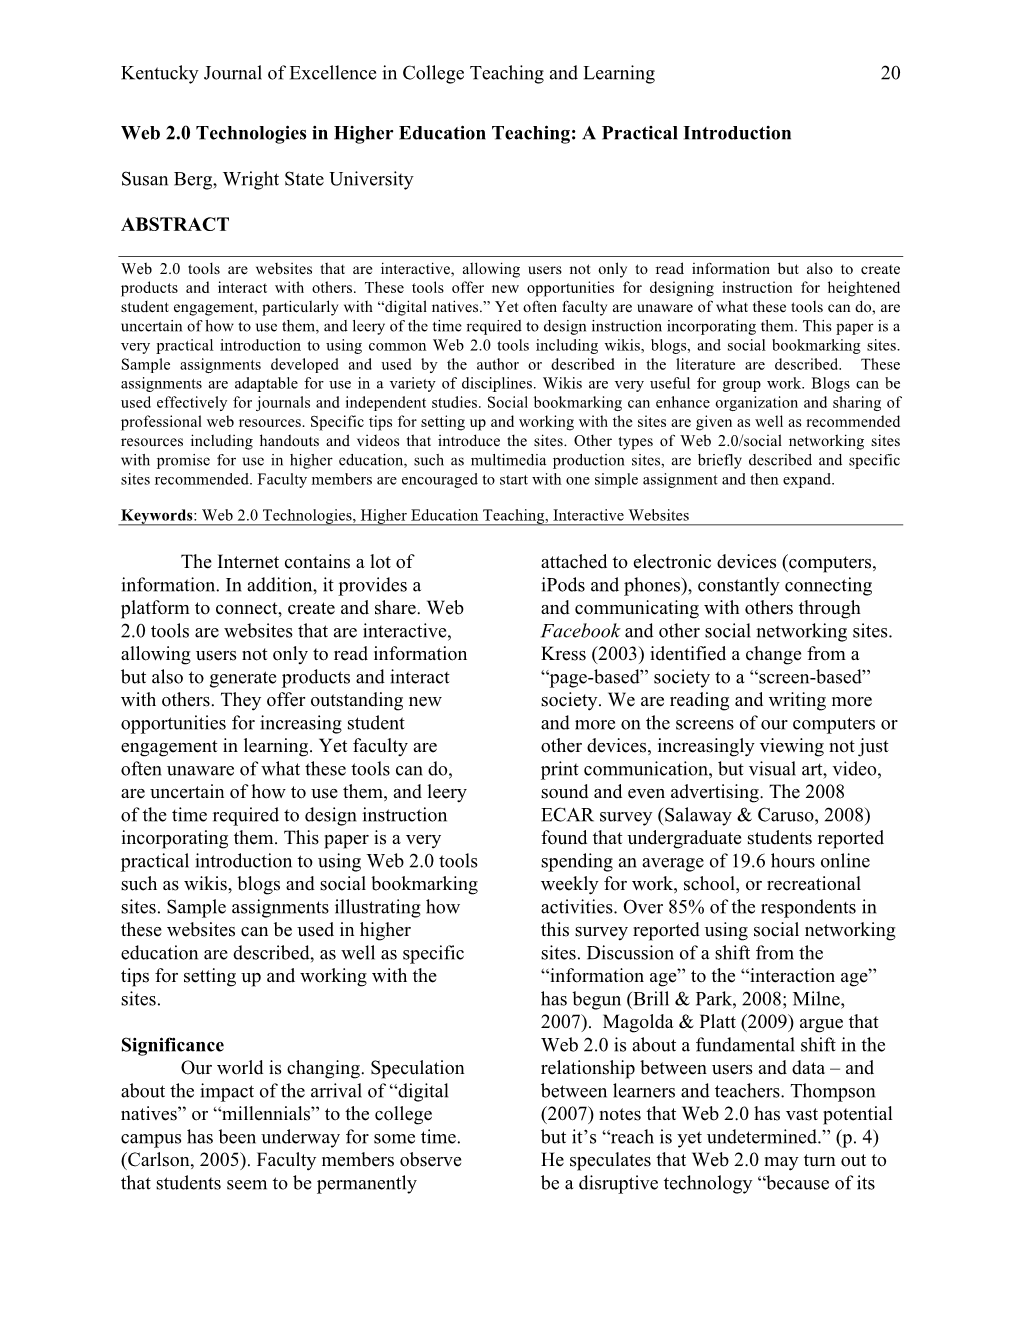 Kentucky Journal of Excellence in College Teaching and Learning 20 Web 2.0 Technologies in Higher Education Teaching: a Practica